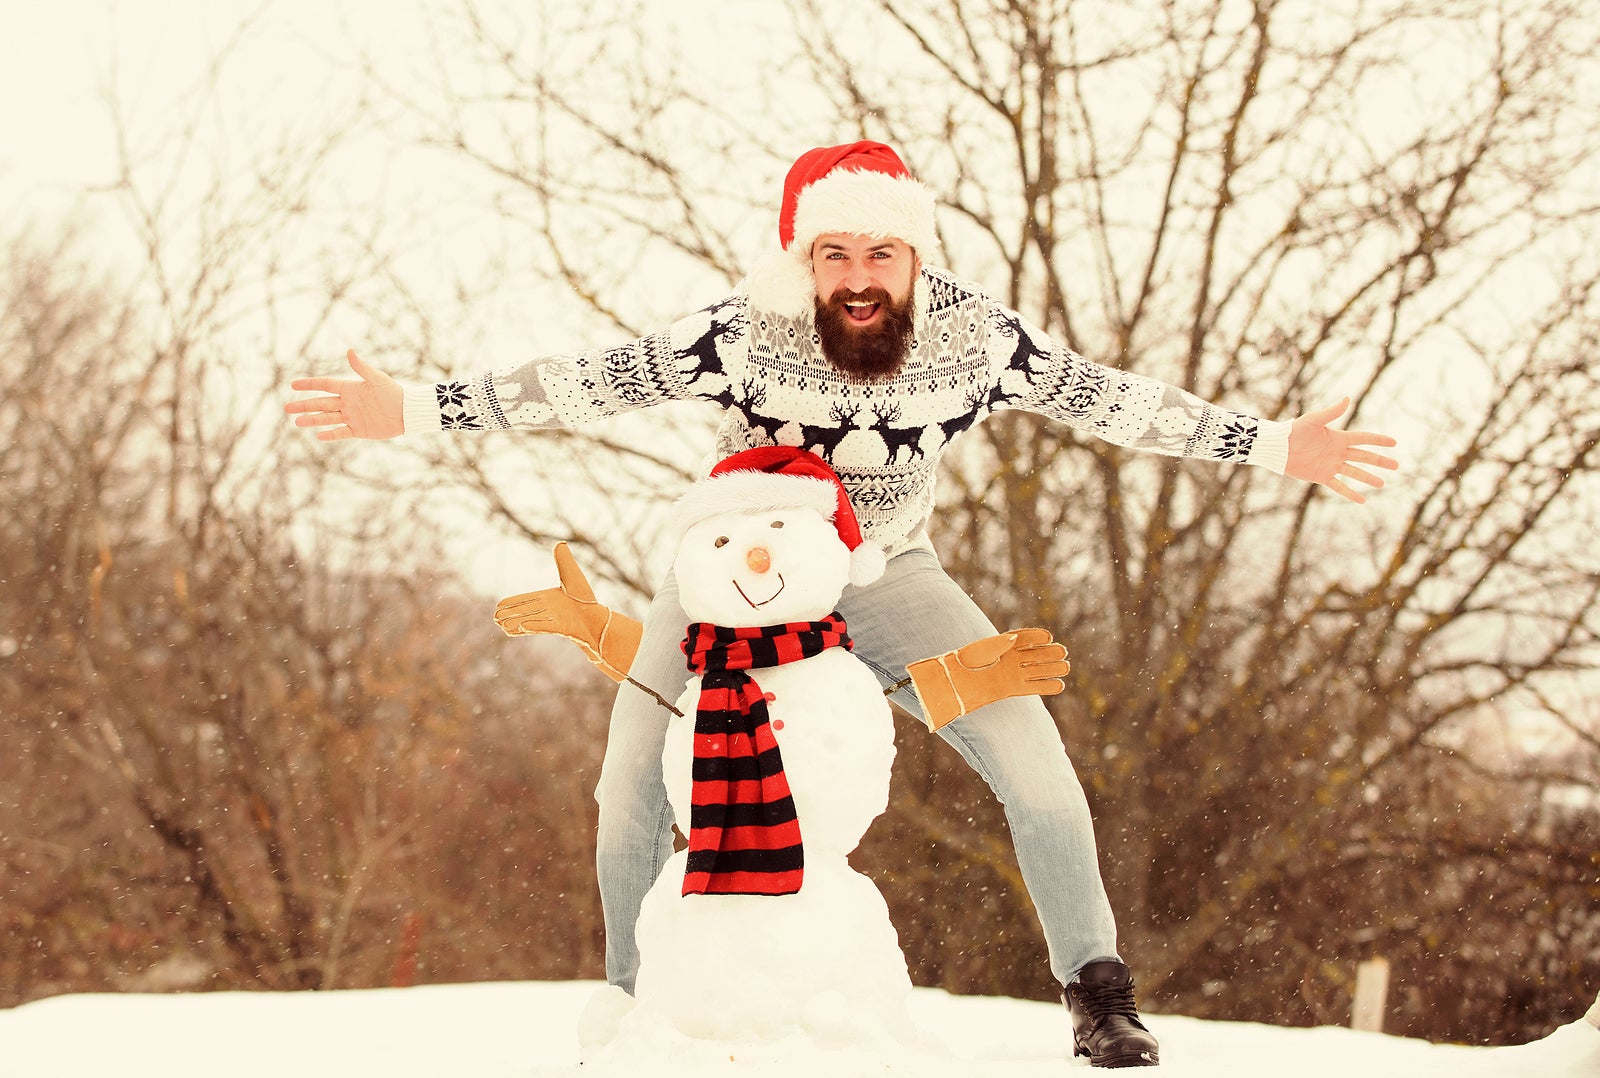 Fun and entertainment. Winter vacation. Man made snowman. Hipster with beard outdoors. Man with Santa hat having fun outdoors. Guy happy face snowy nature background. Winter games. Winter activity